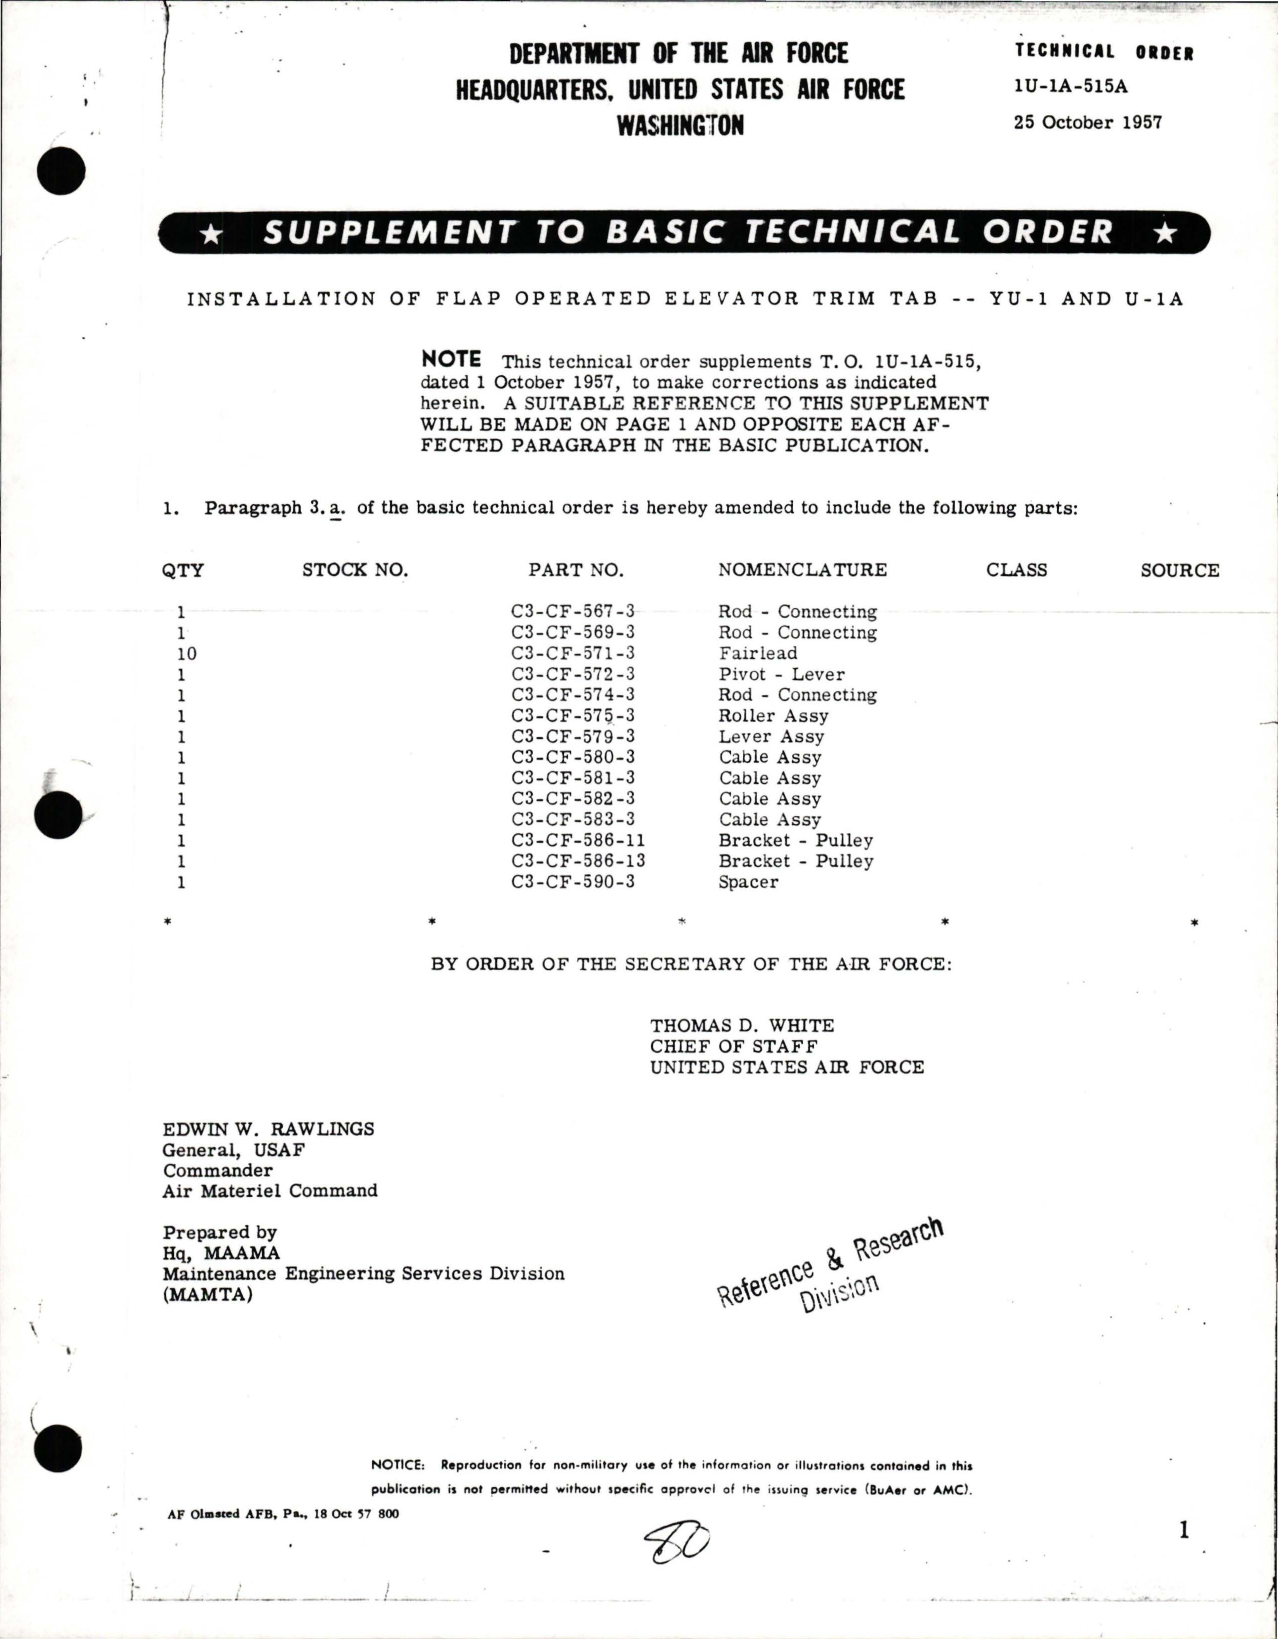 Sample page 1 from AirCorps Library document: Installation of Flap Operated Elevator Trim Tab for YU-1 and U-1A